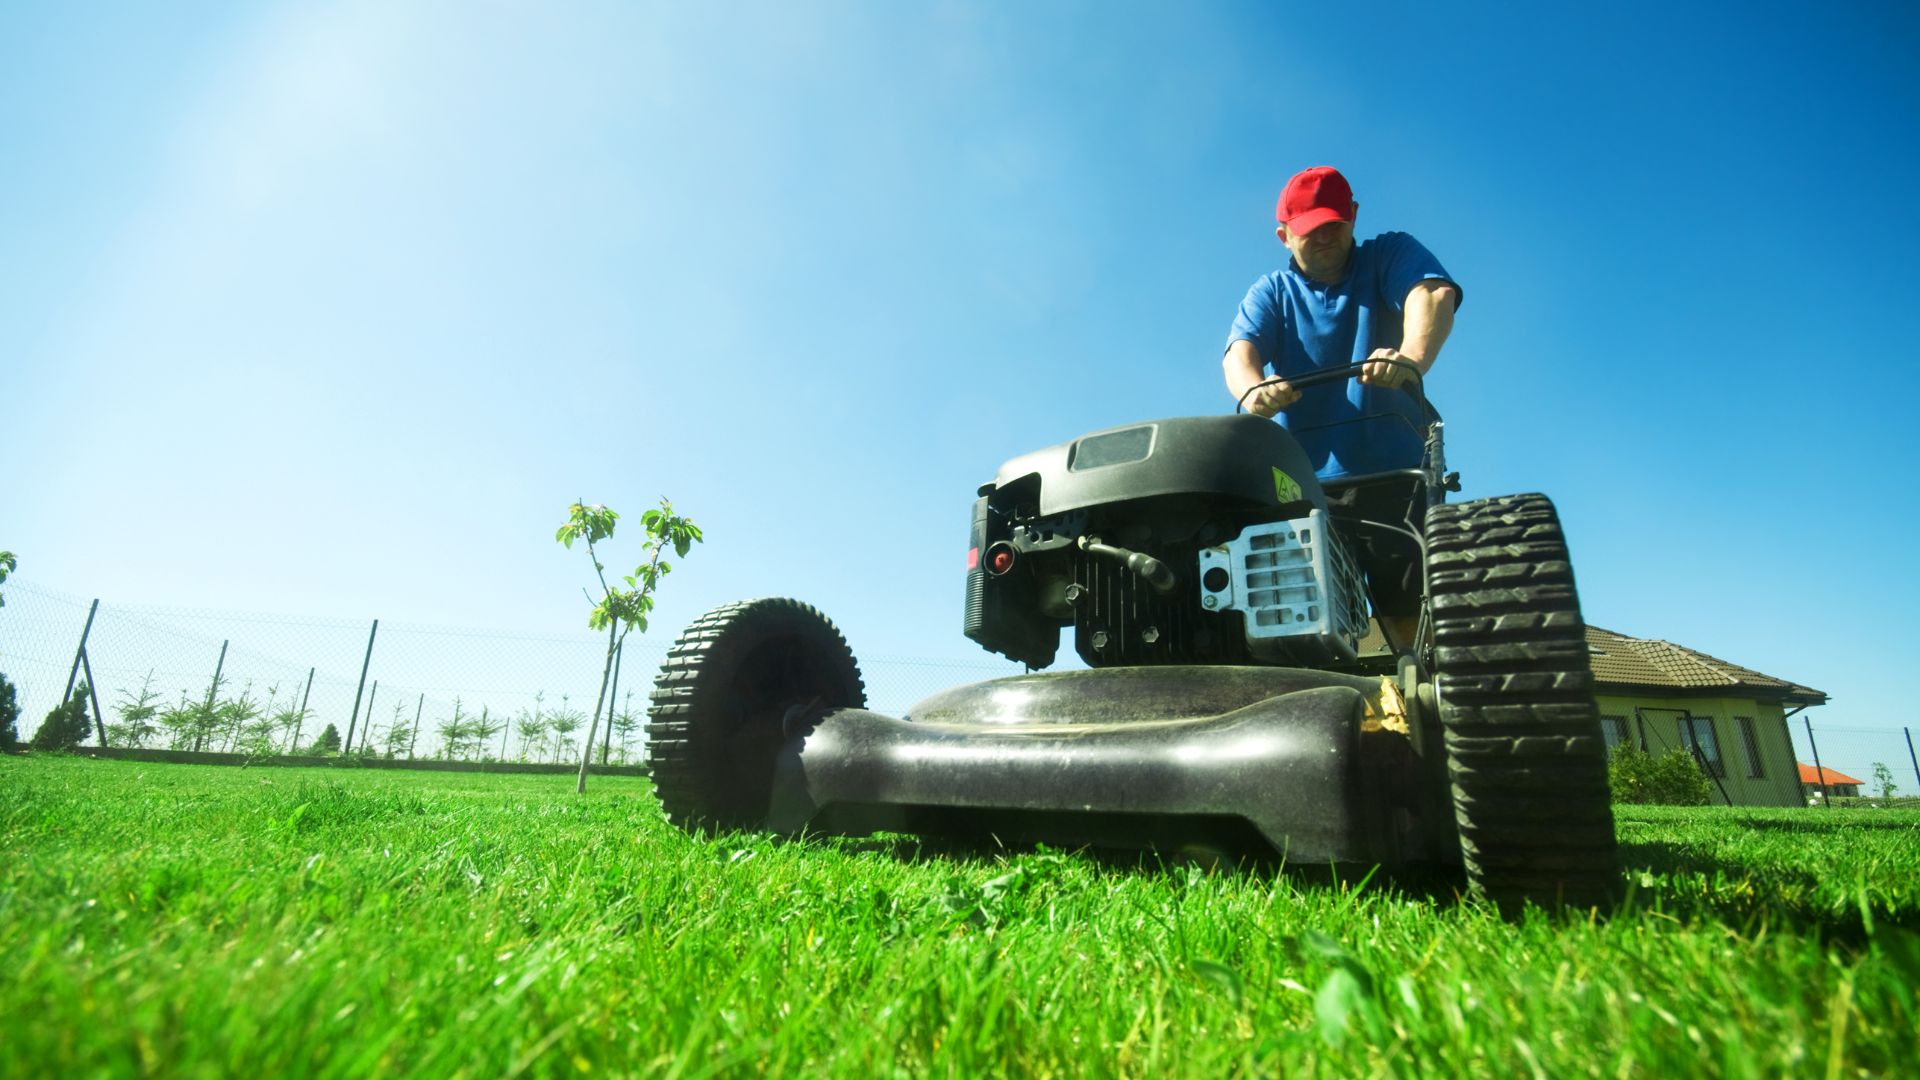 Mowing the lawn regularly not only keeps your lawn looking neat and tidy, but it also promotes healthy growth of the grass.